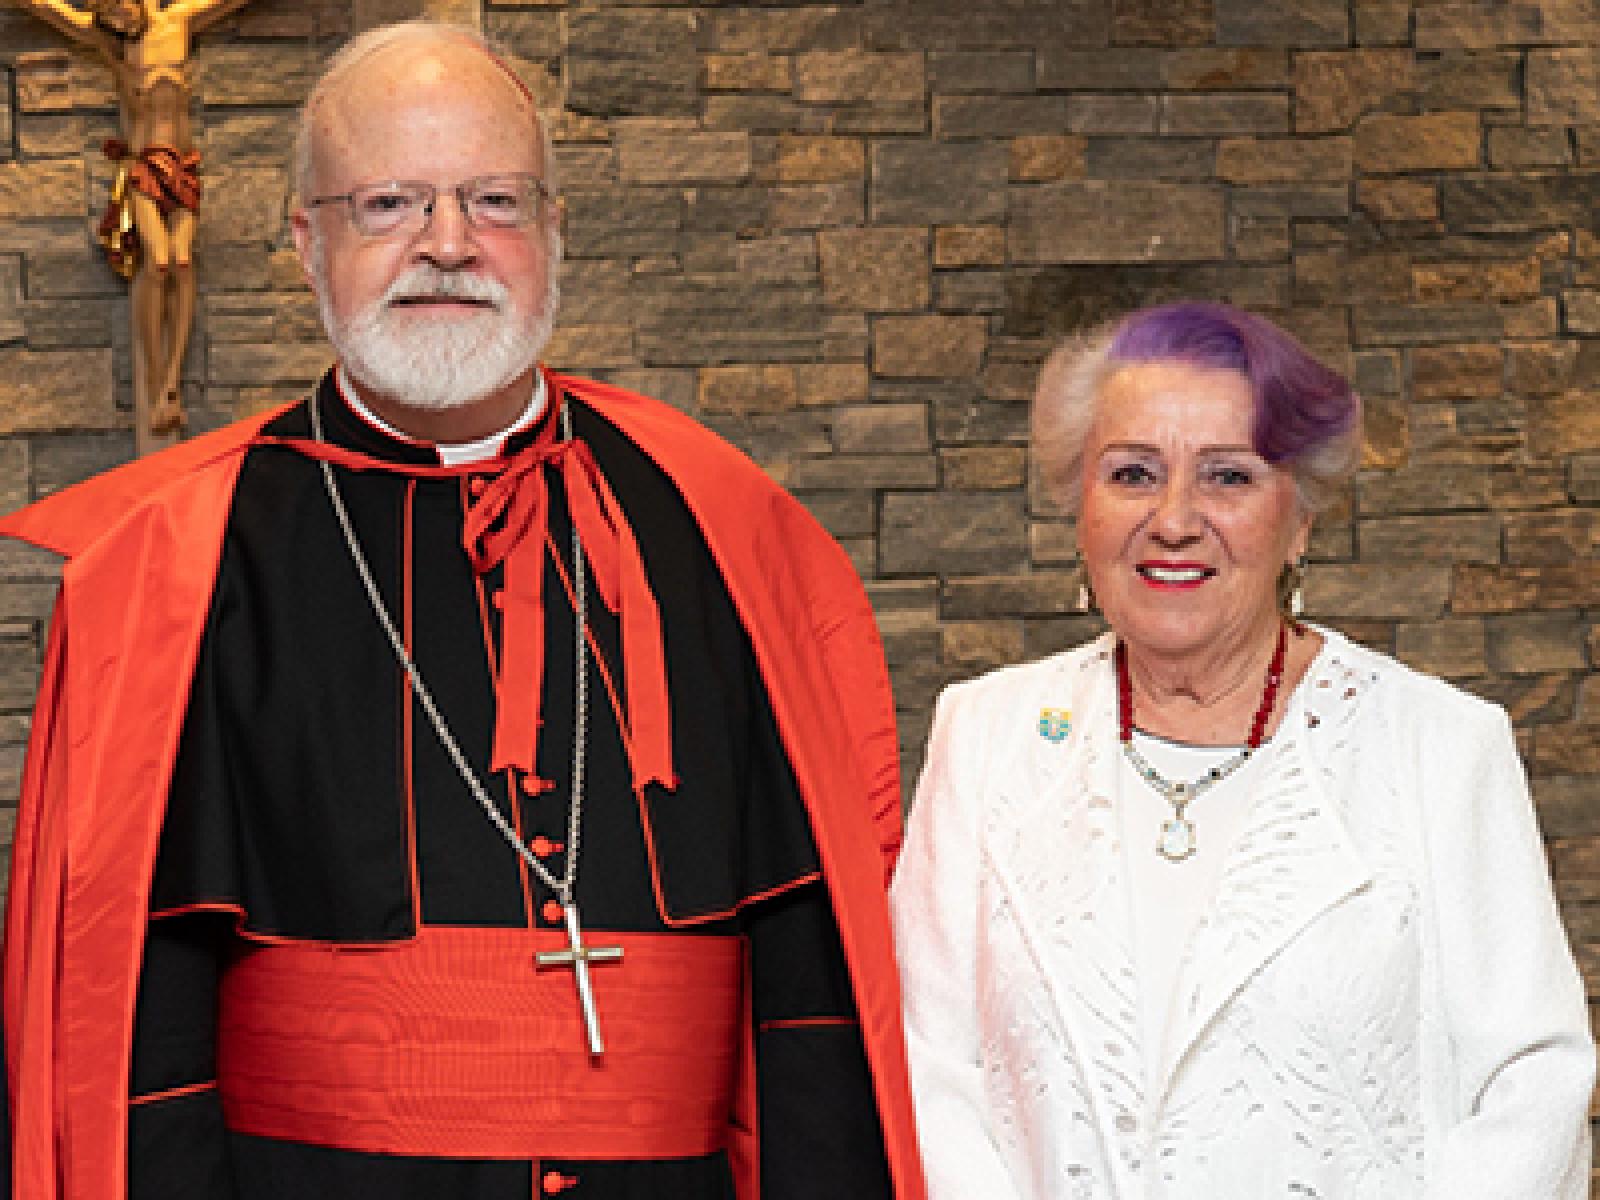 Ms. Christine Roessel and Cardinal O'Malley